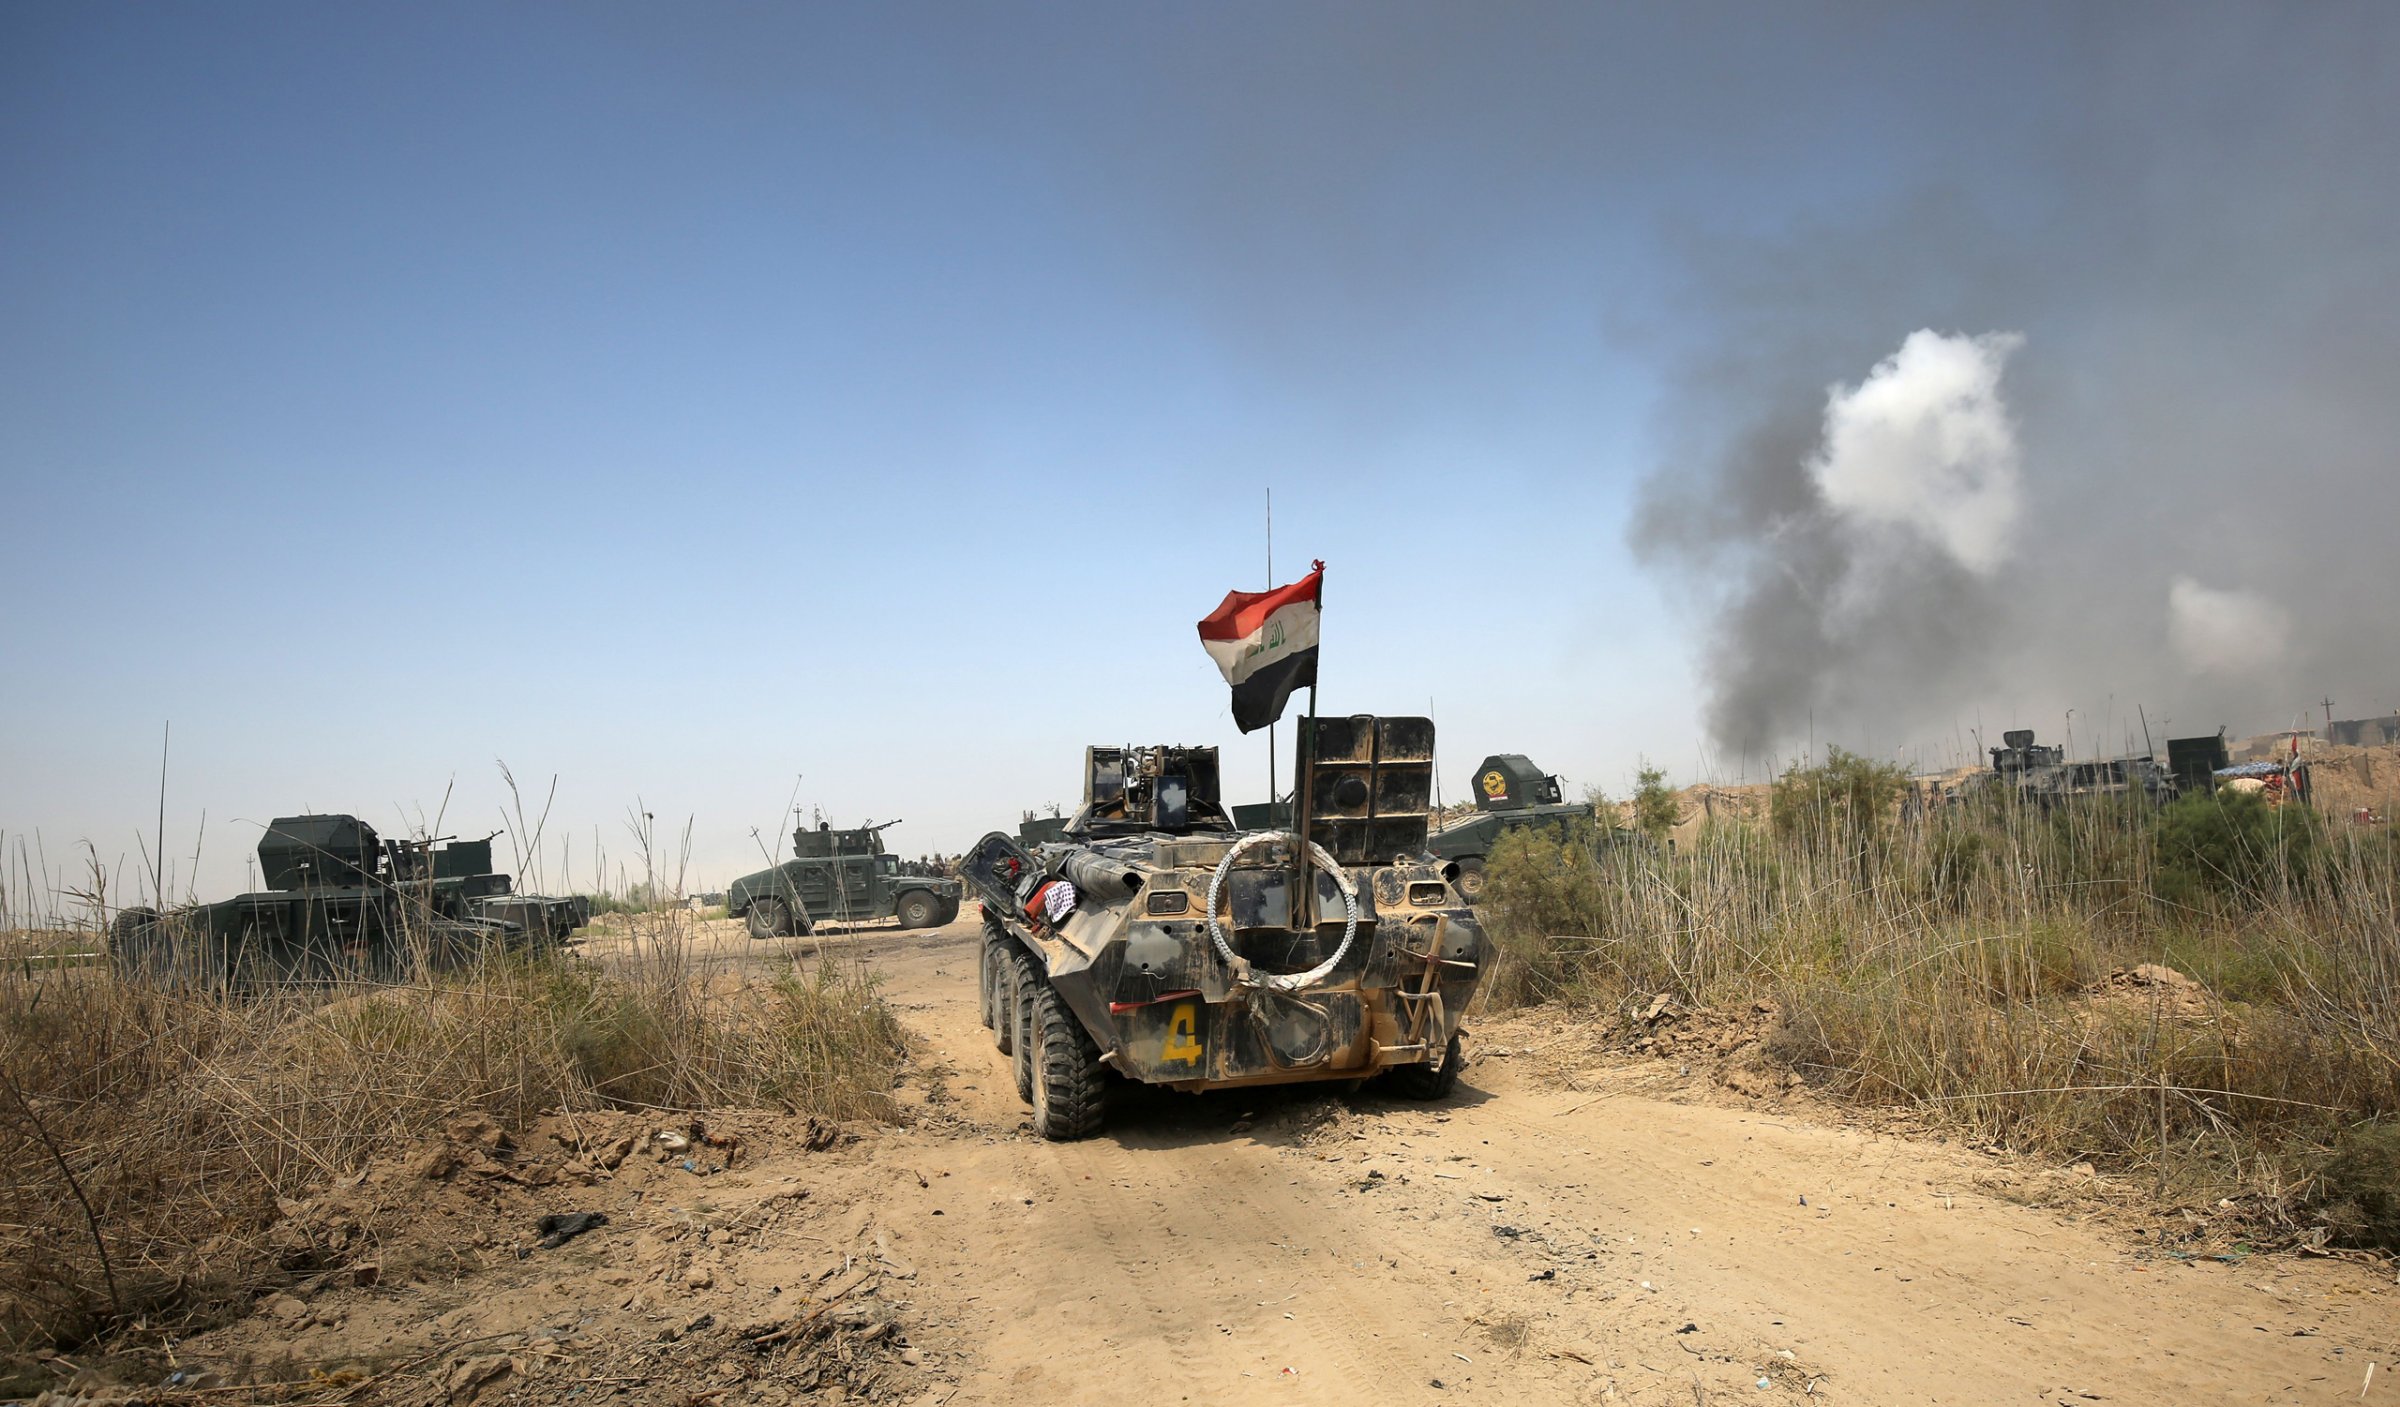 Iraqi government forces drive their armoured vehicles during an operation, backed by air support from the US-led coalition, in Fallujah's southern Shuhada neighbourhood to retake the area from the Islamic State (IS) group on June 15, 2016.